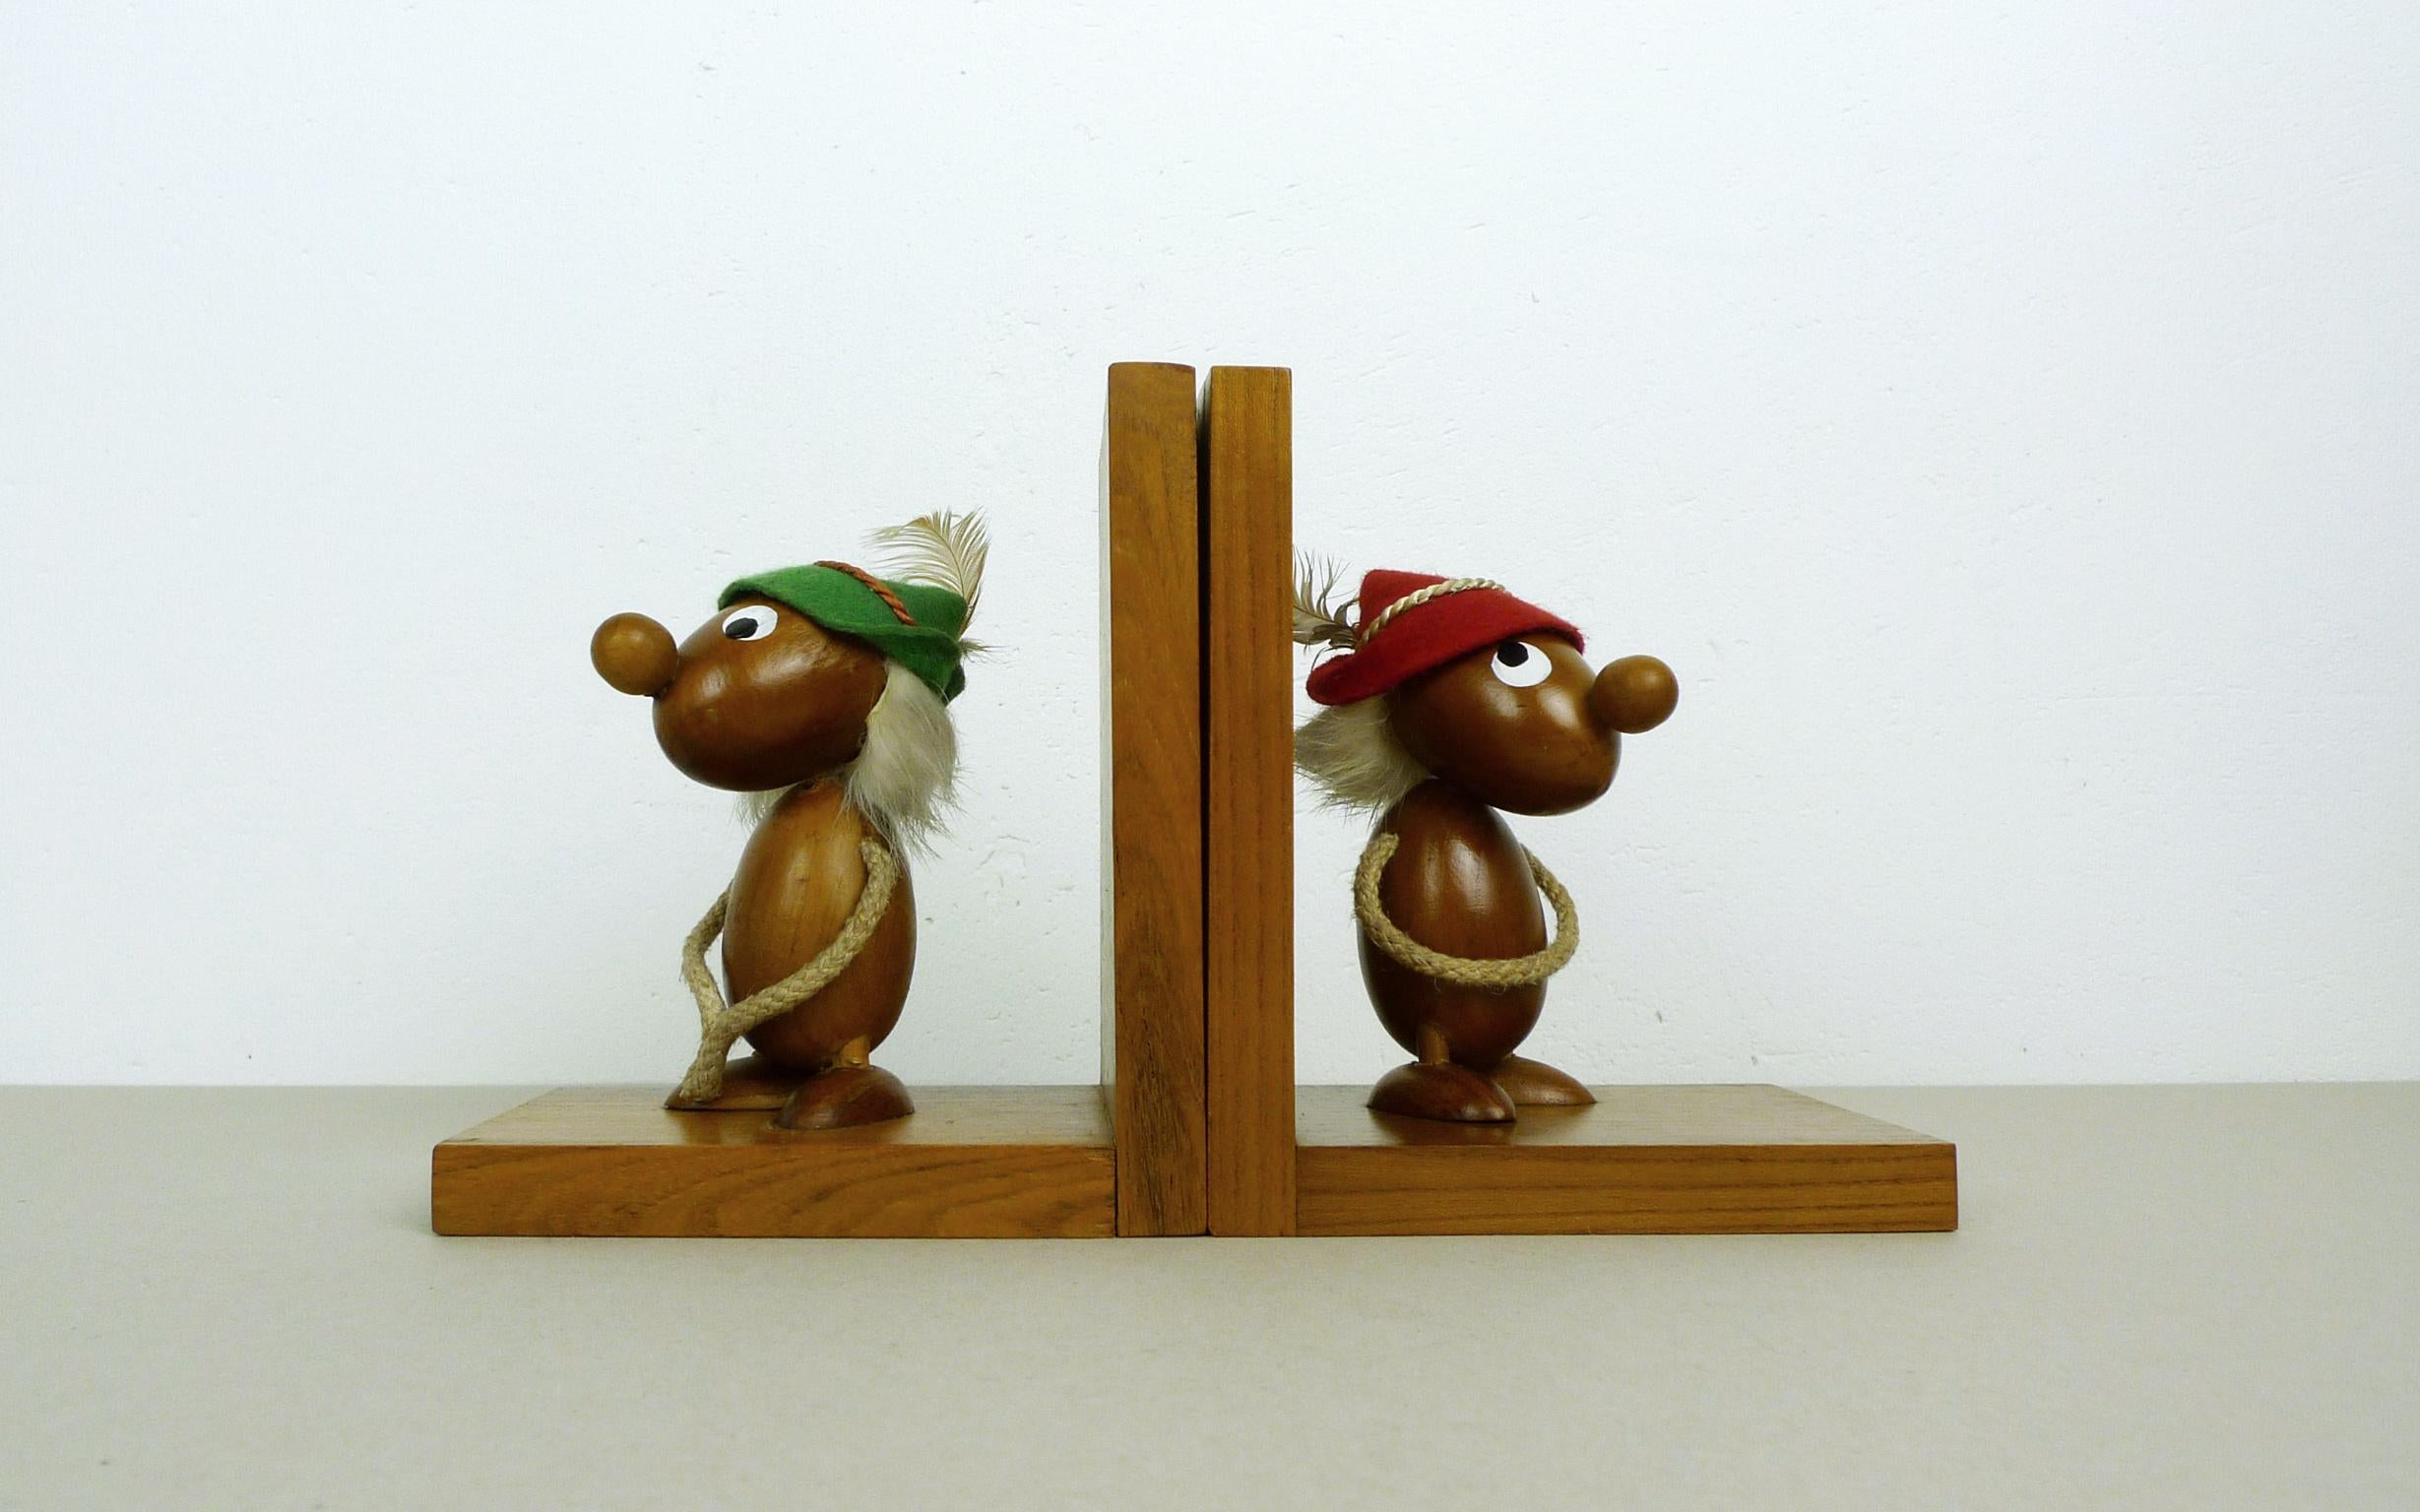 This pair of Italian bookends was produced by Ciola in the 1950s. They feature teak figurines with red and green hats made of felt. The beige-colored arms are made of twisted cord. The bookends are in good original condition.